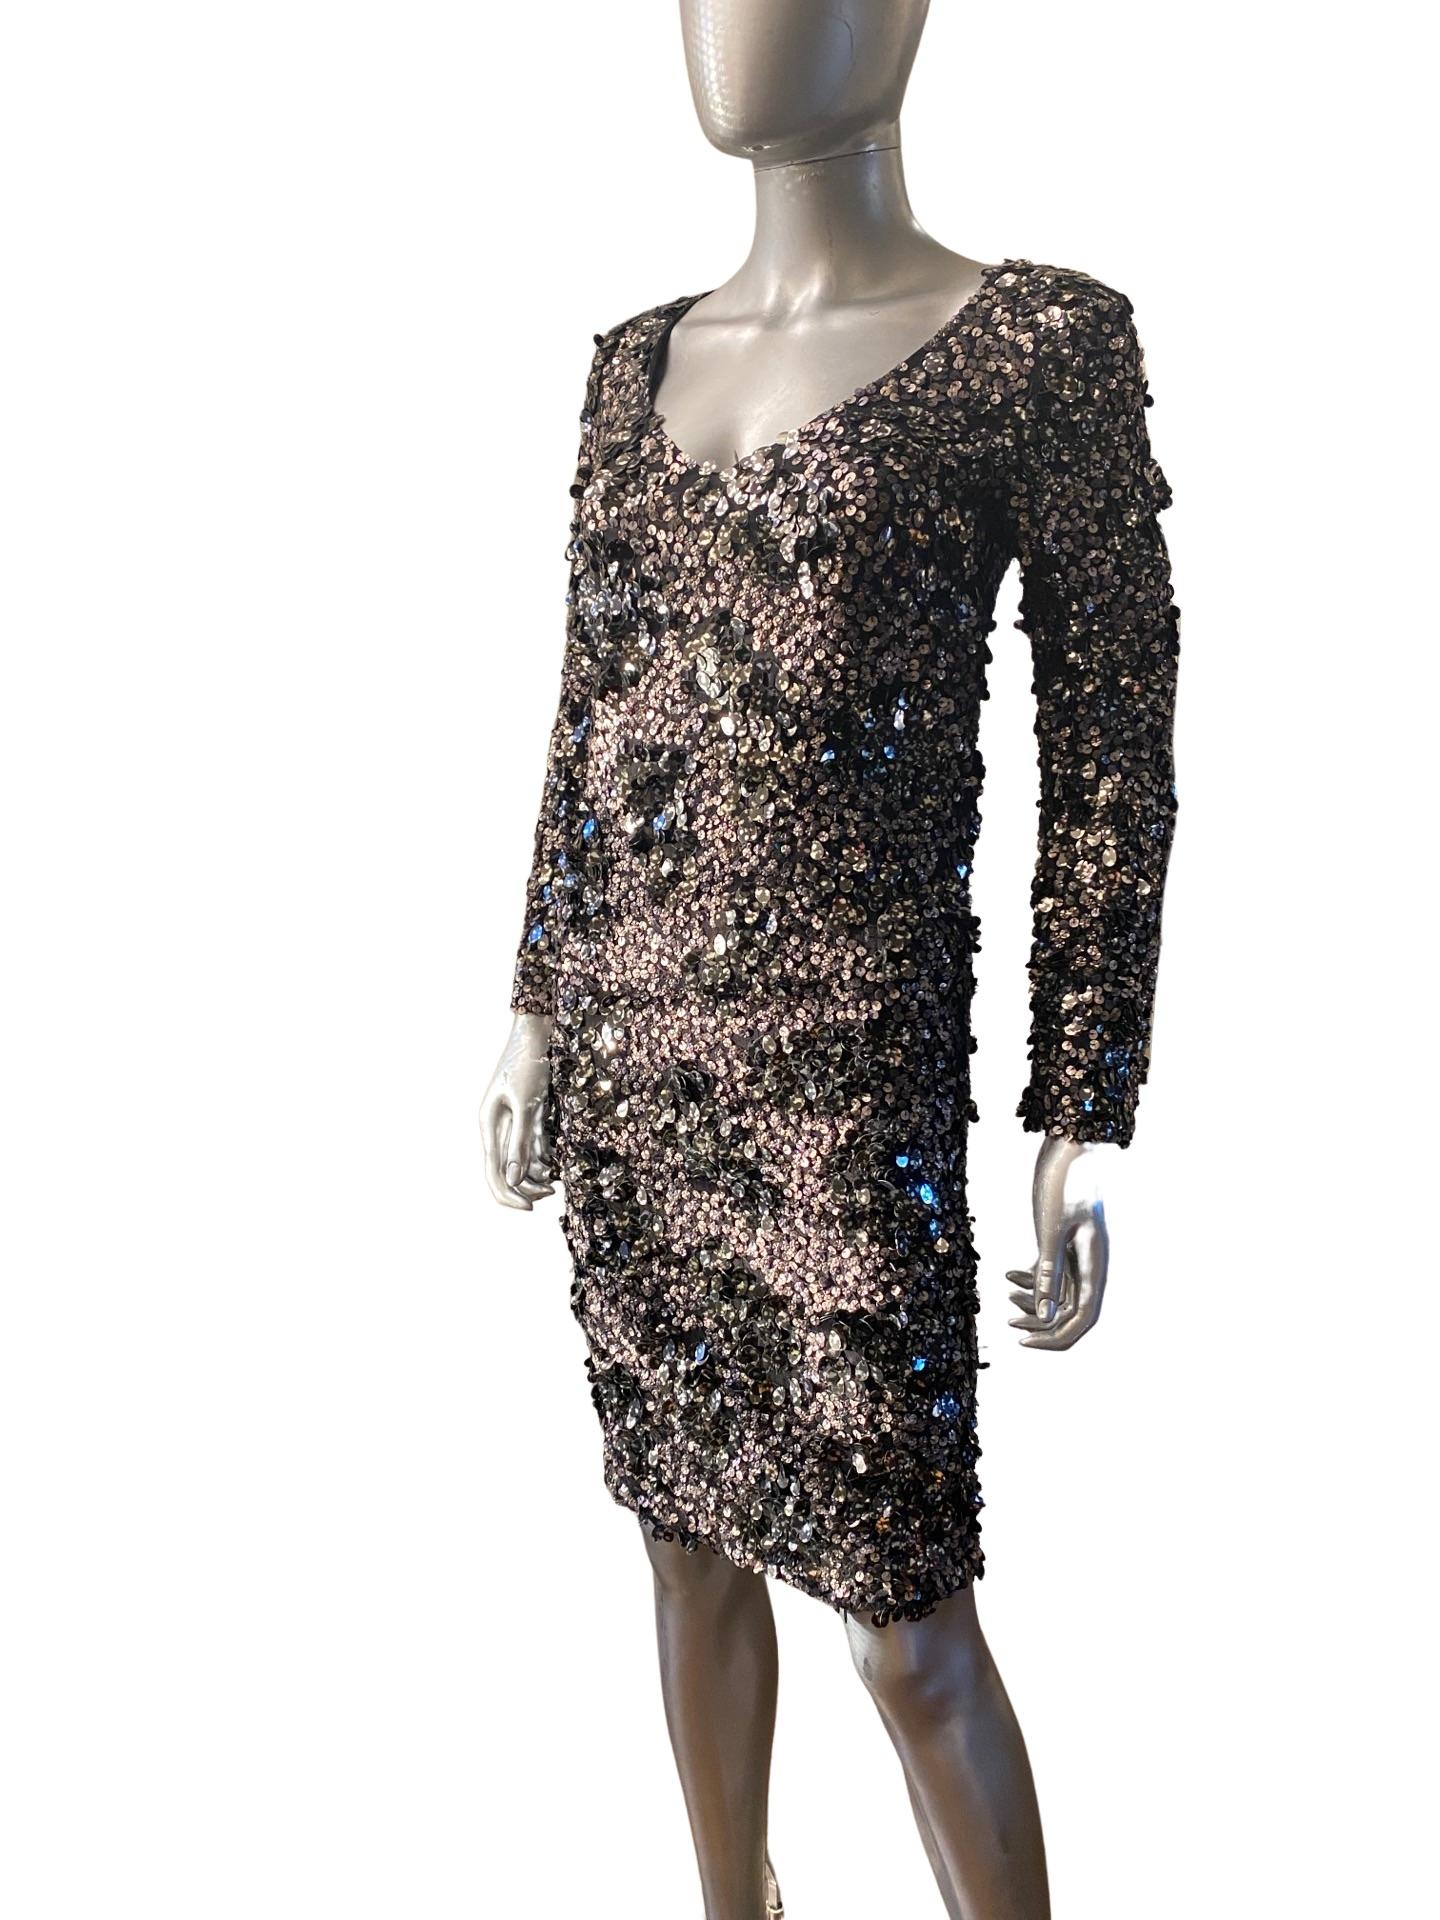 St John Couture Modern Silk Dress with 3D Shimmy  Sexy Dangling Sequins Size 2.  For Sale 4